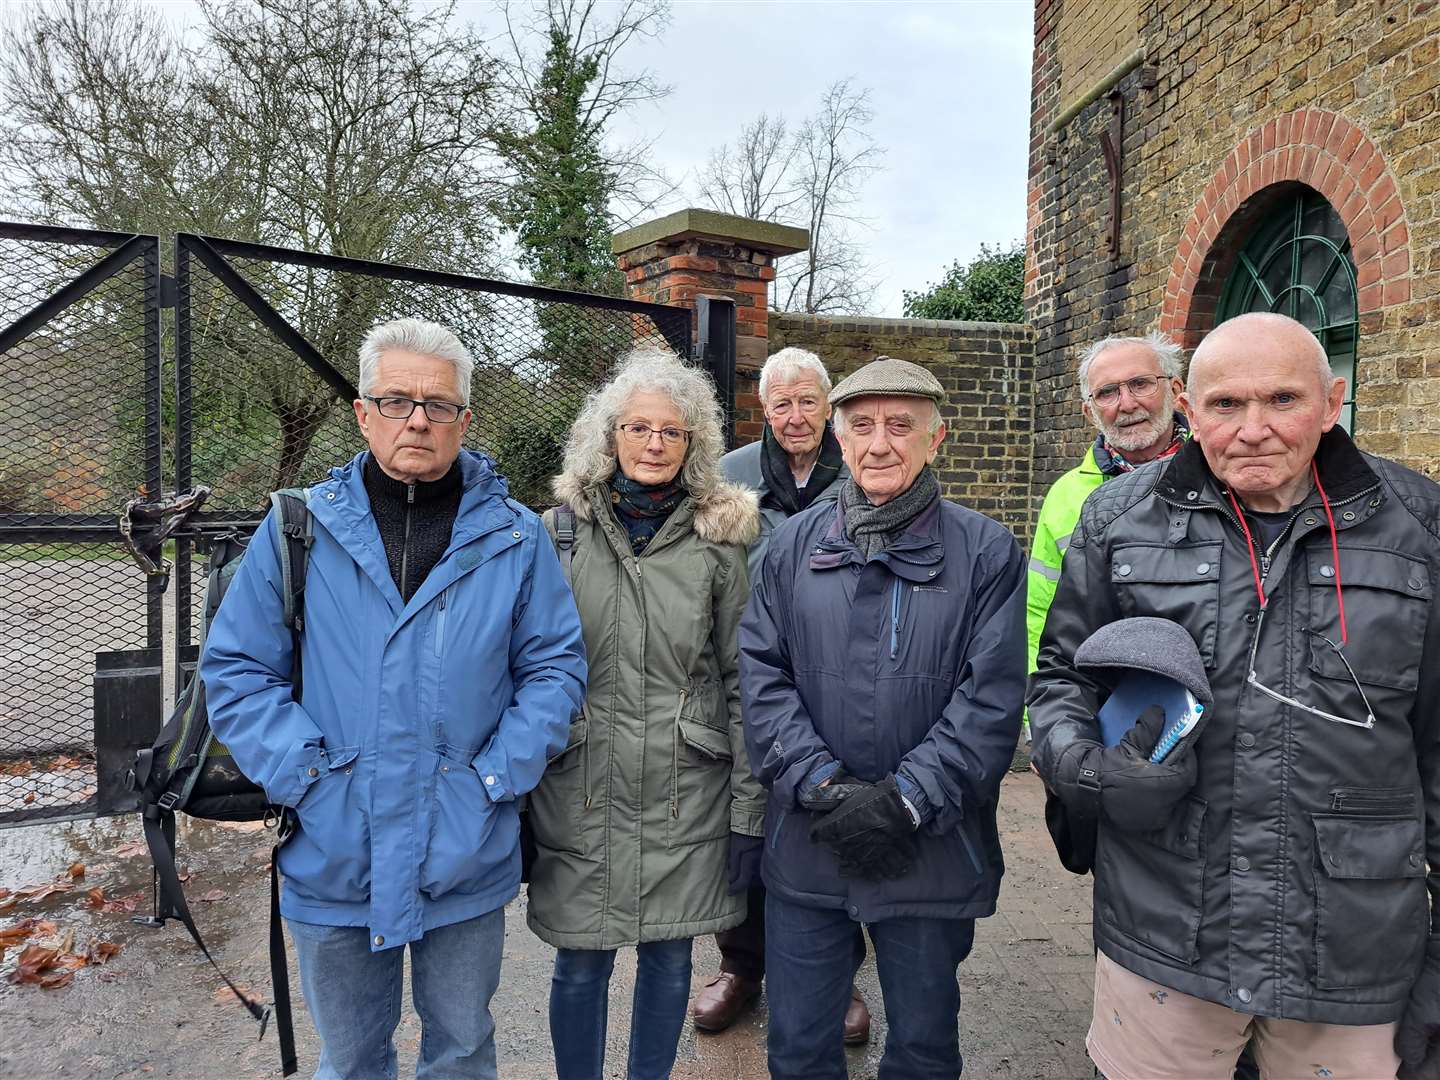 Cllr Julian Saunders, Linda Harrison, Andrew Osborne, Trevor Payne, Rocyn Williams and Robin Sayewell are trying to ensure the route through Faversham's former Morrisons is a public right of way